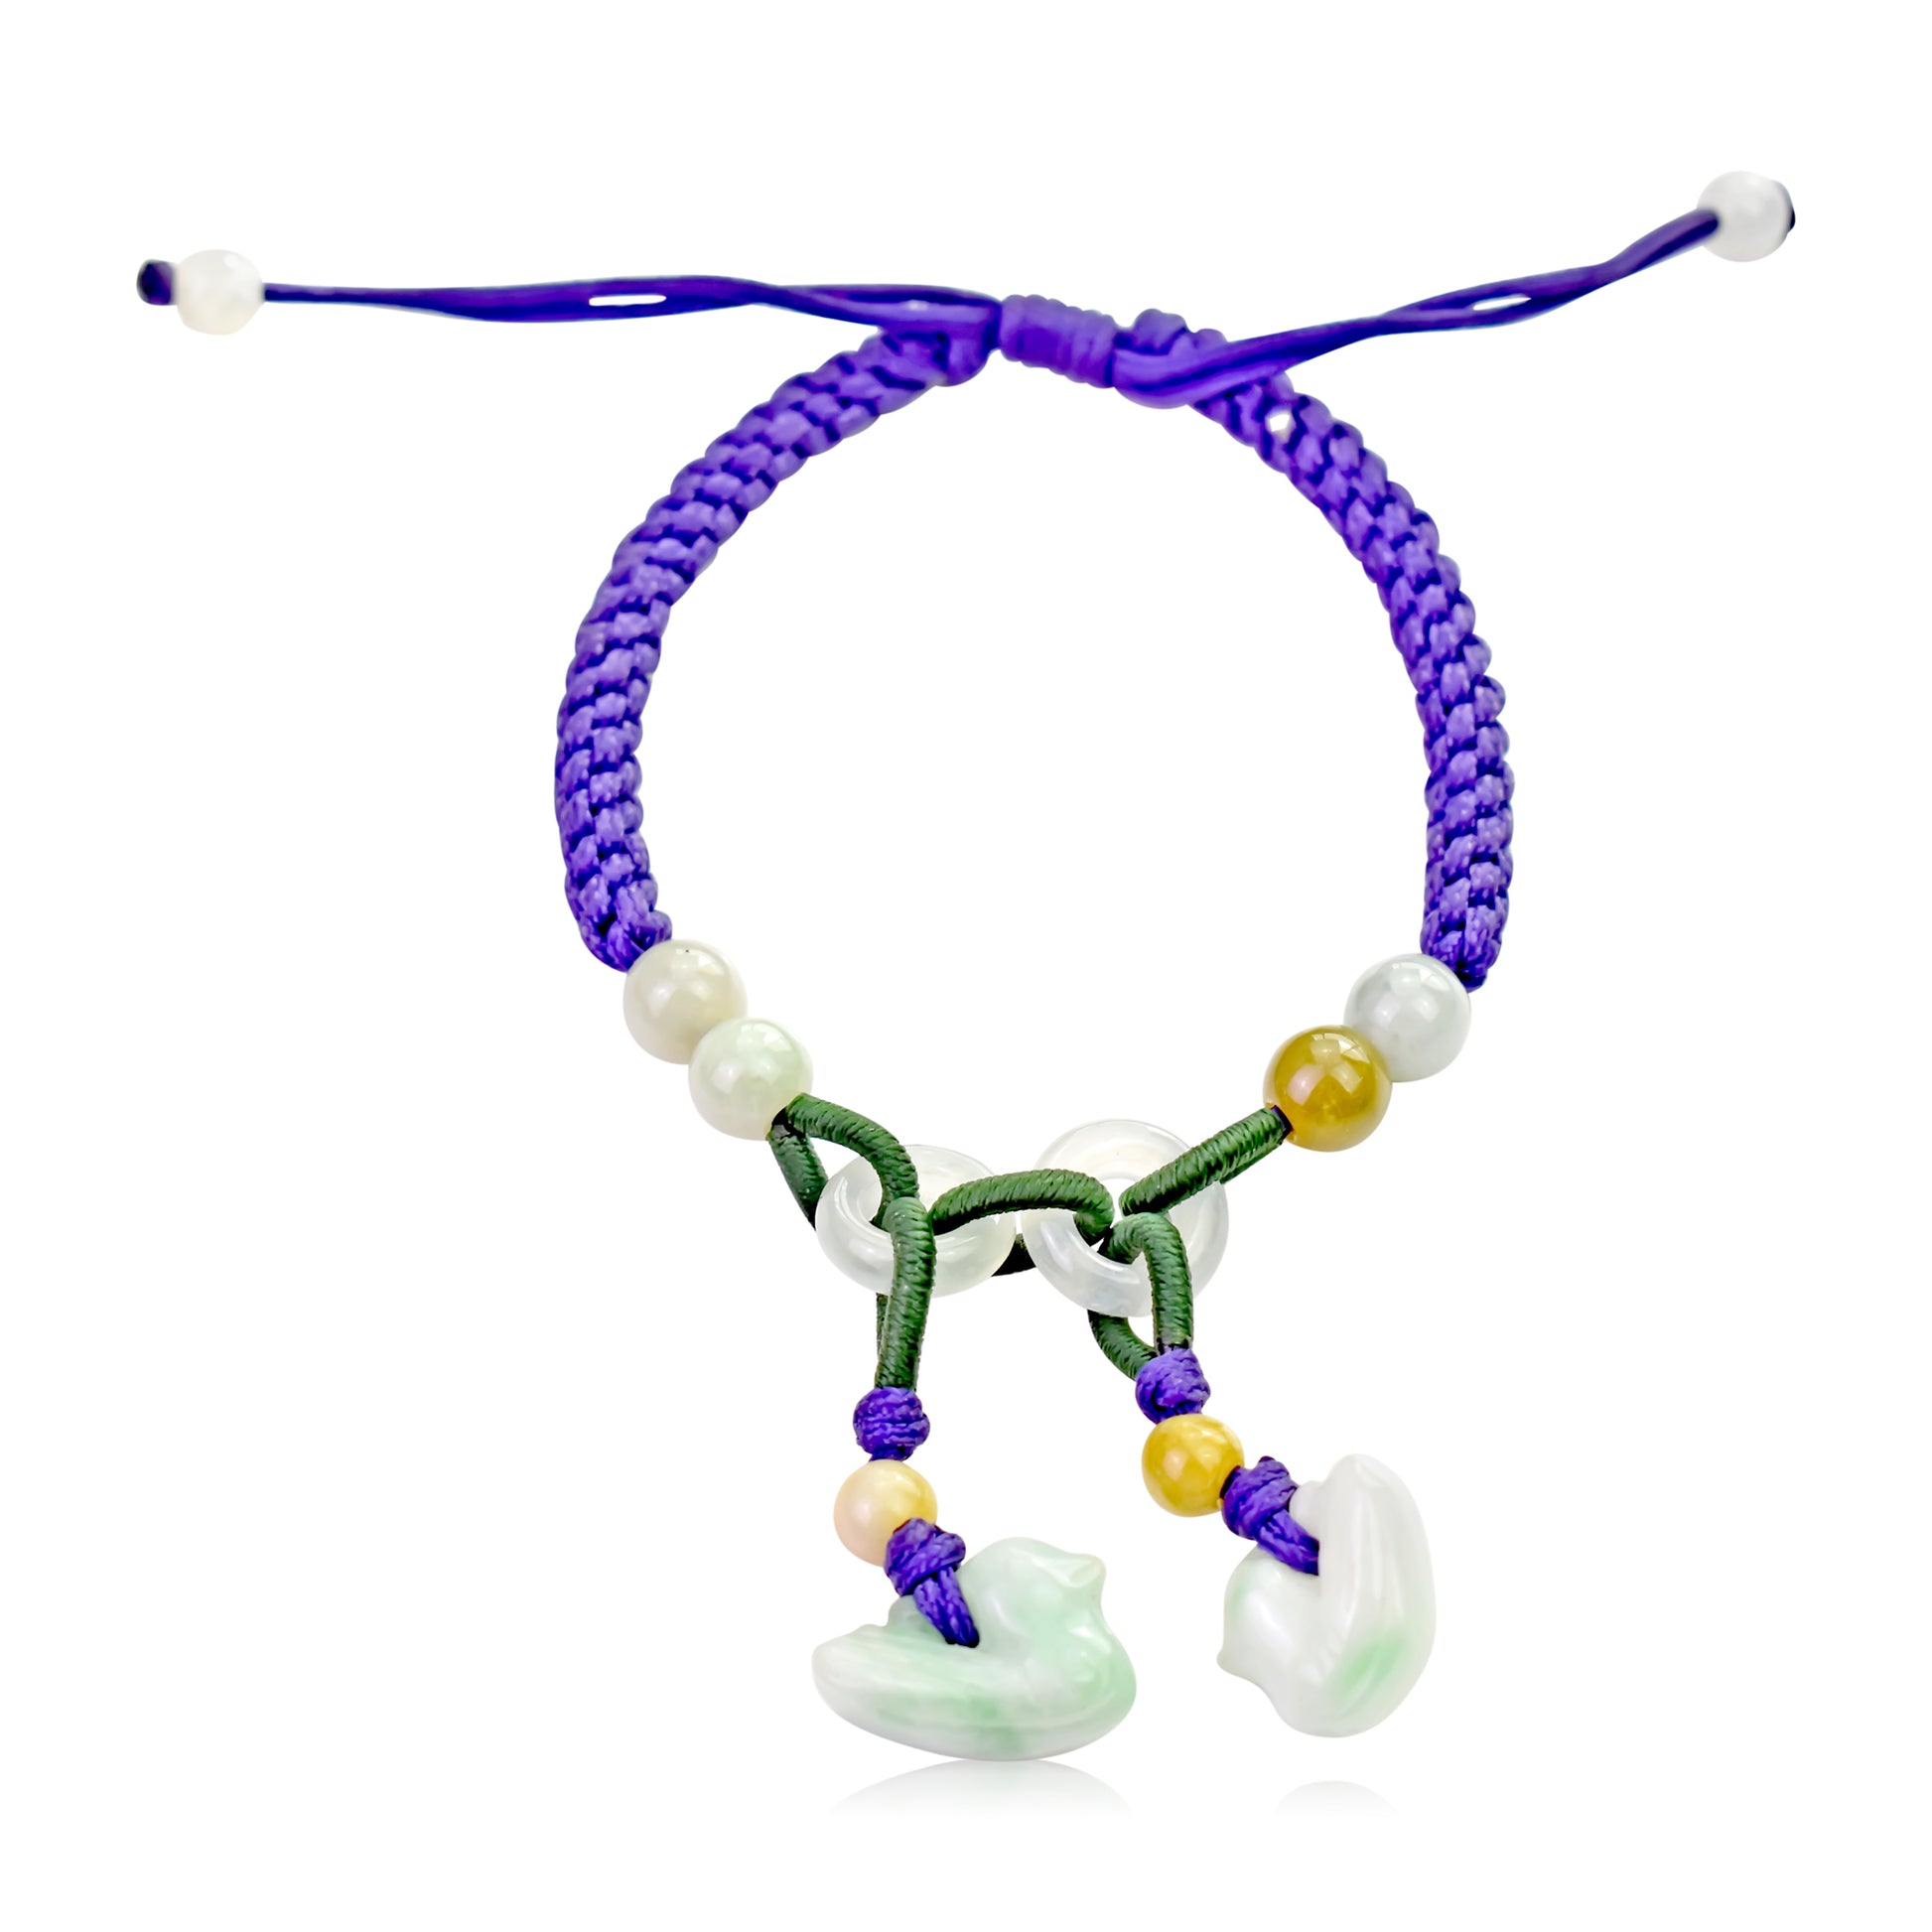 Express Your Style with a Unique Double Dove Handmade Jade Bracelet made with Purple Cord